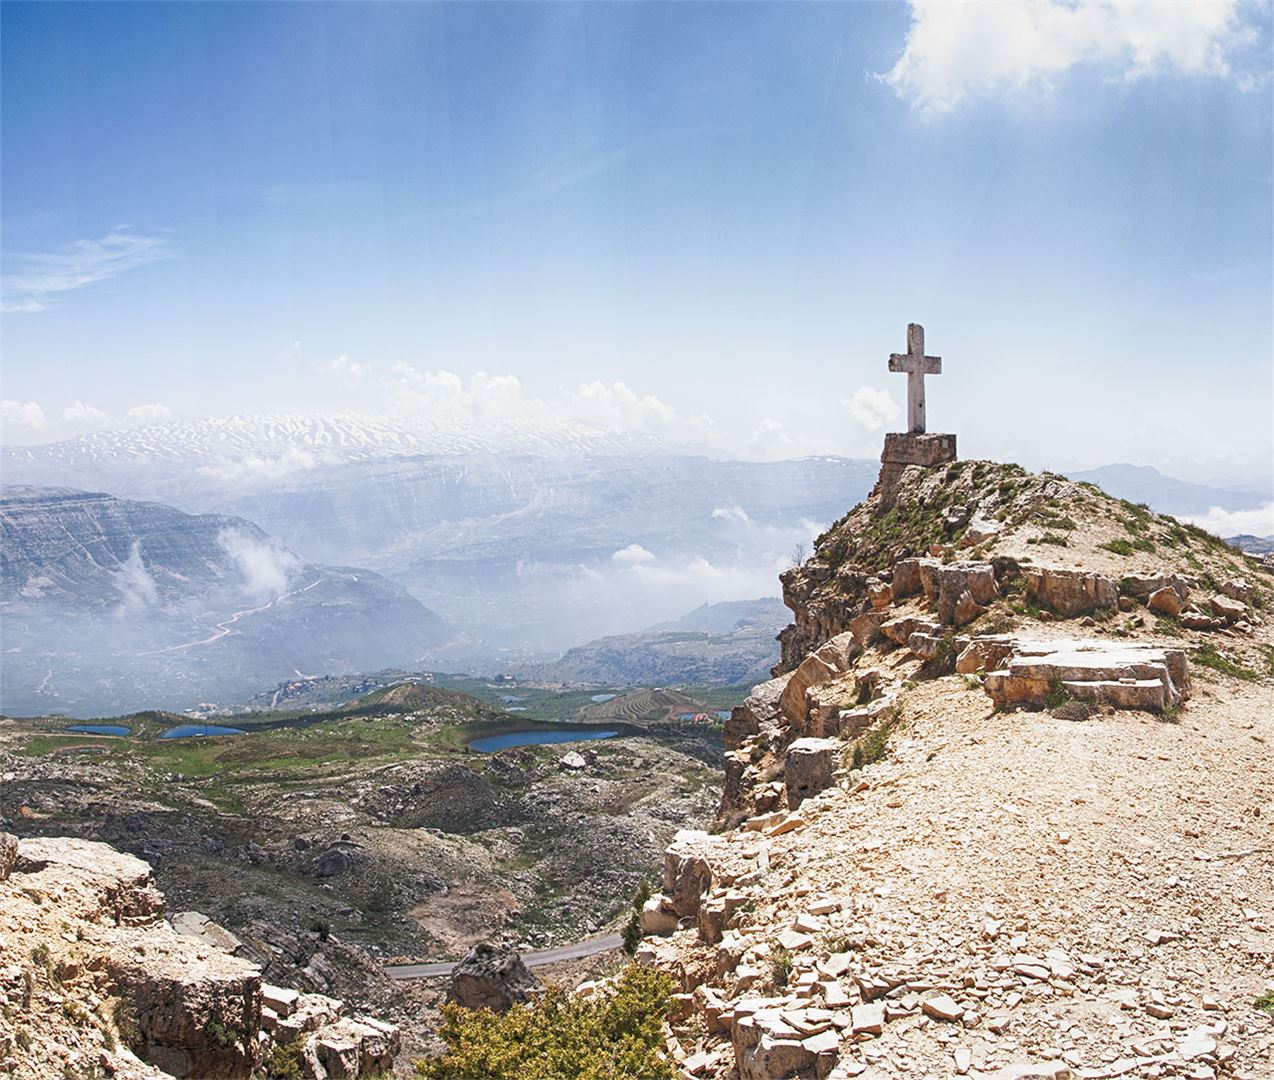 360 View Taken from the Top of the Mountain Near the Cross (Saydet El Qarn, Laklouk - Akoura)